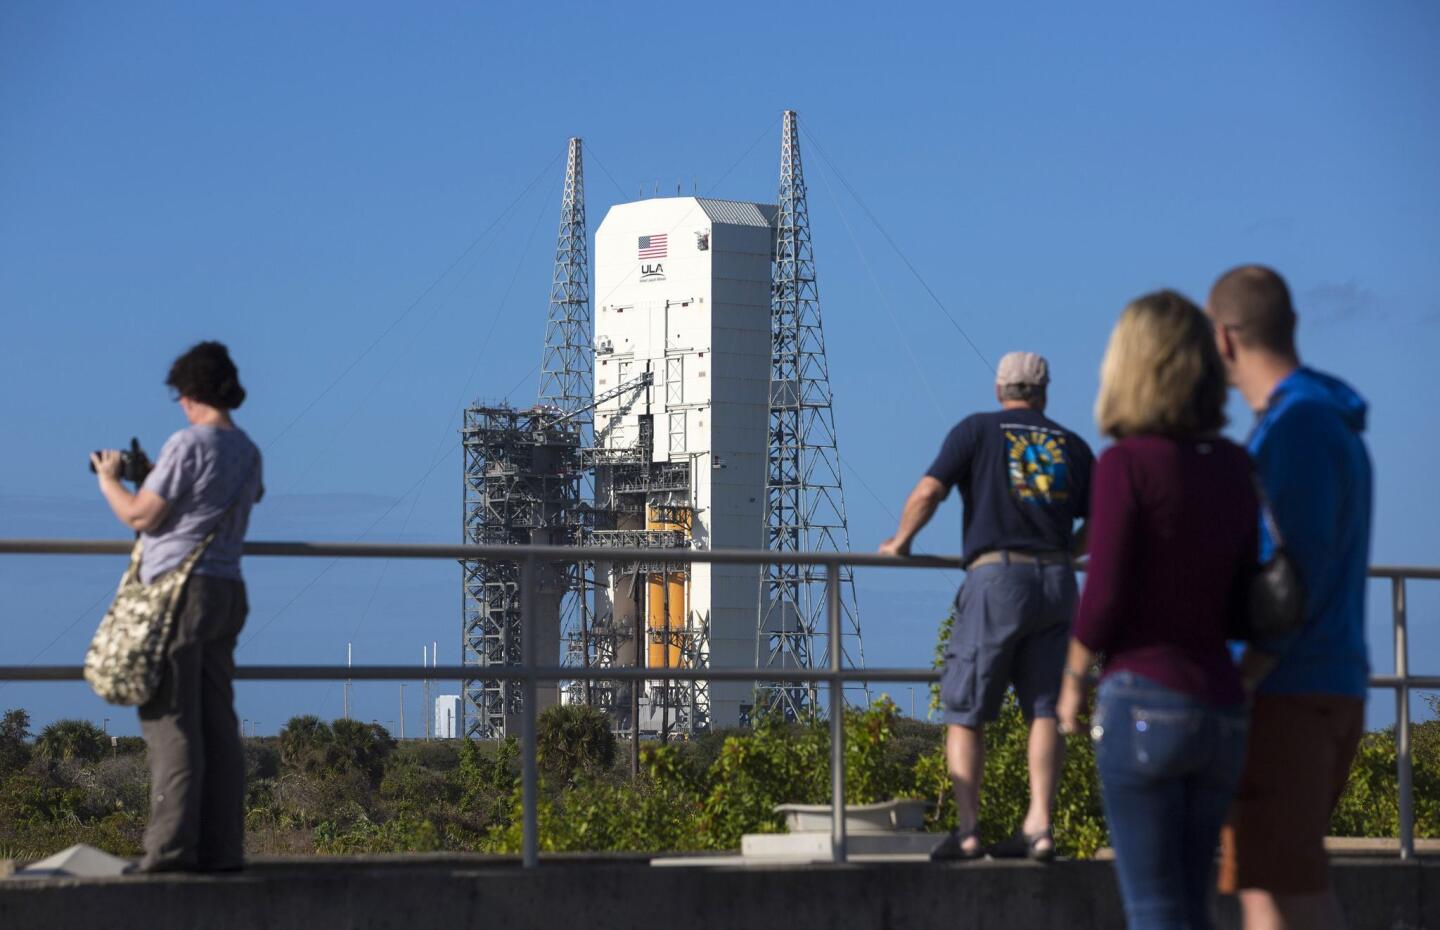 Tourists stand on the original Apollo 1 launch pad overlooking the Delta IV Heavy rocket with the Orion spacecraft on Space Launch Complex 37B pad at the Cape Canaveral Air Force Station in Cape Canaveral, Florida